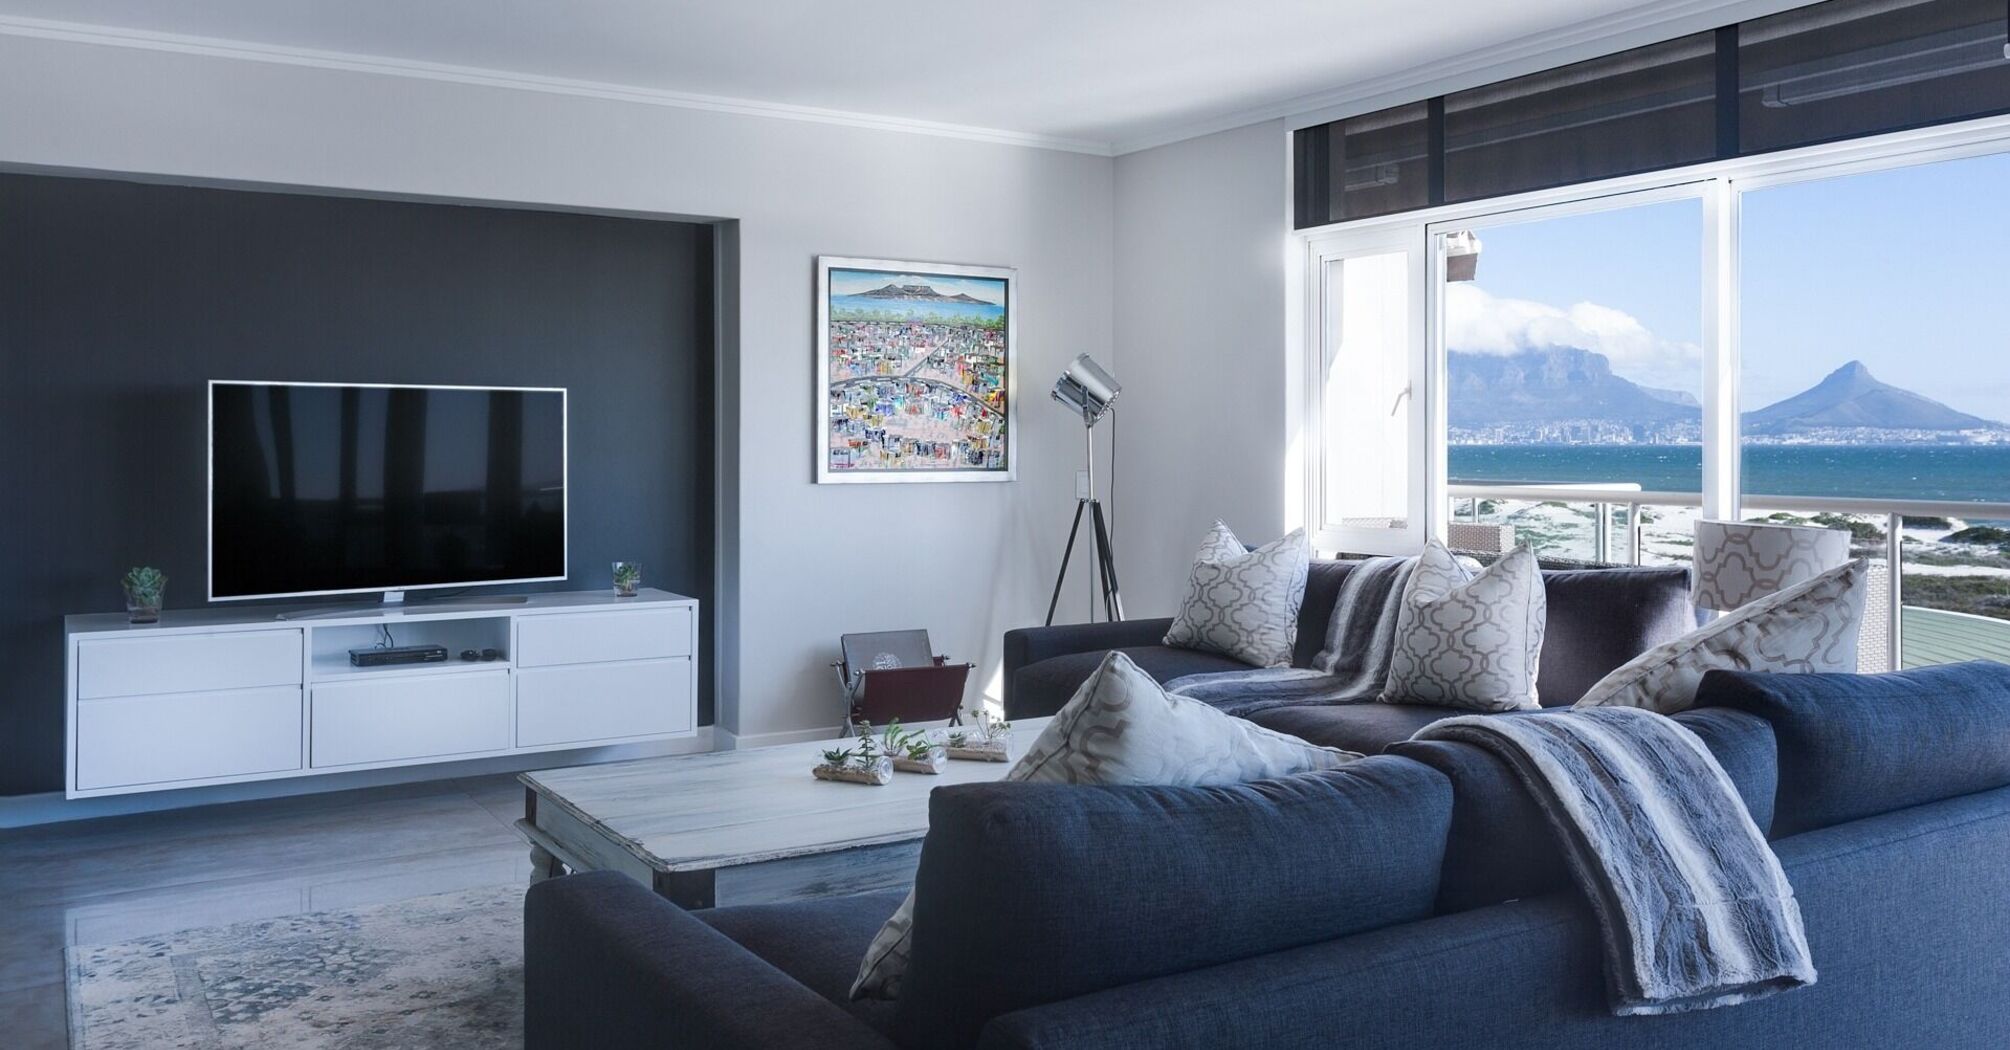 Room with a TV in gray color with a view of the mountains